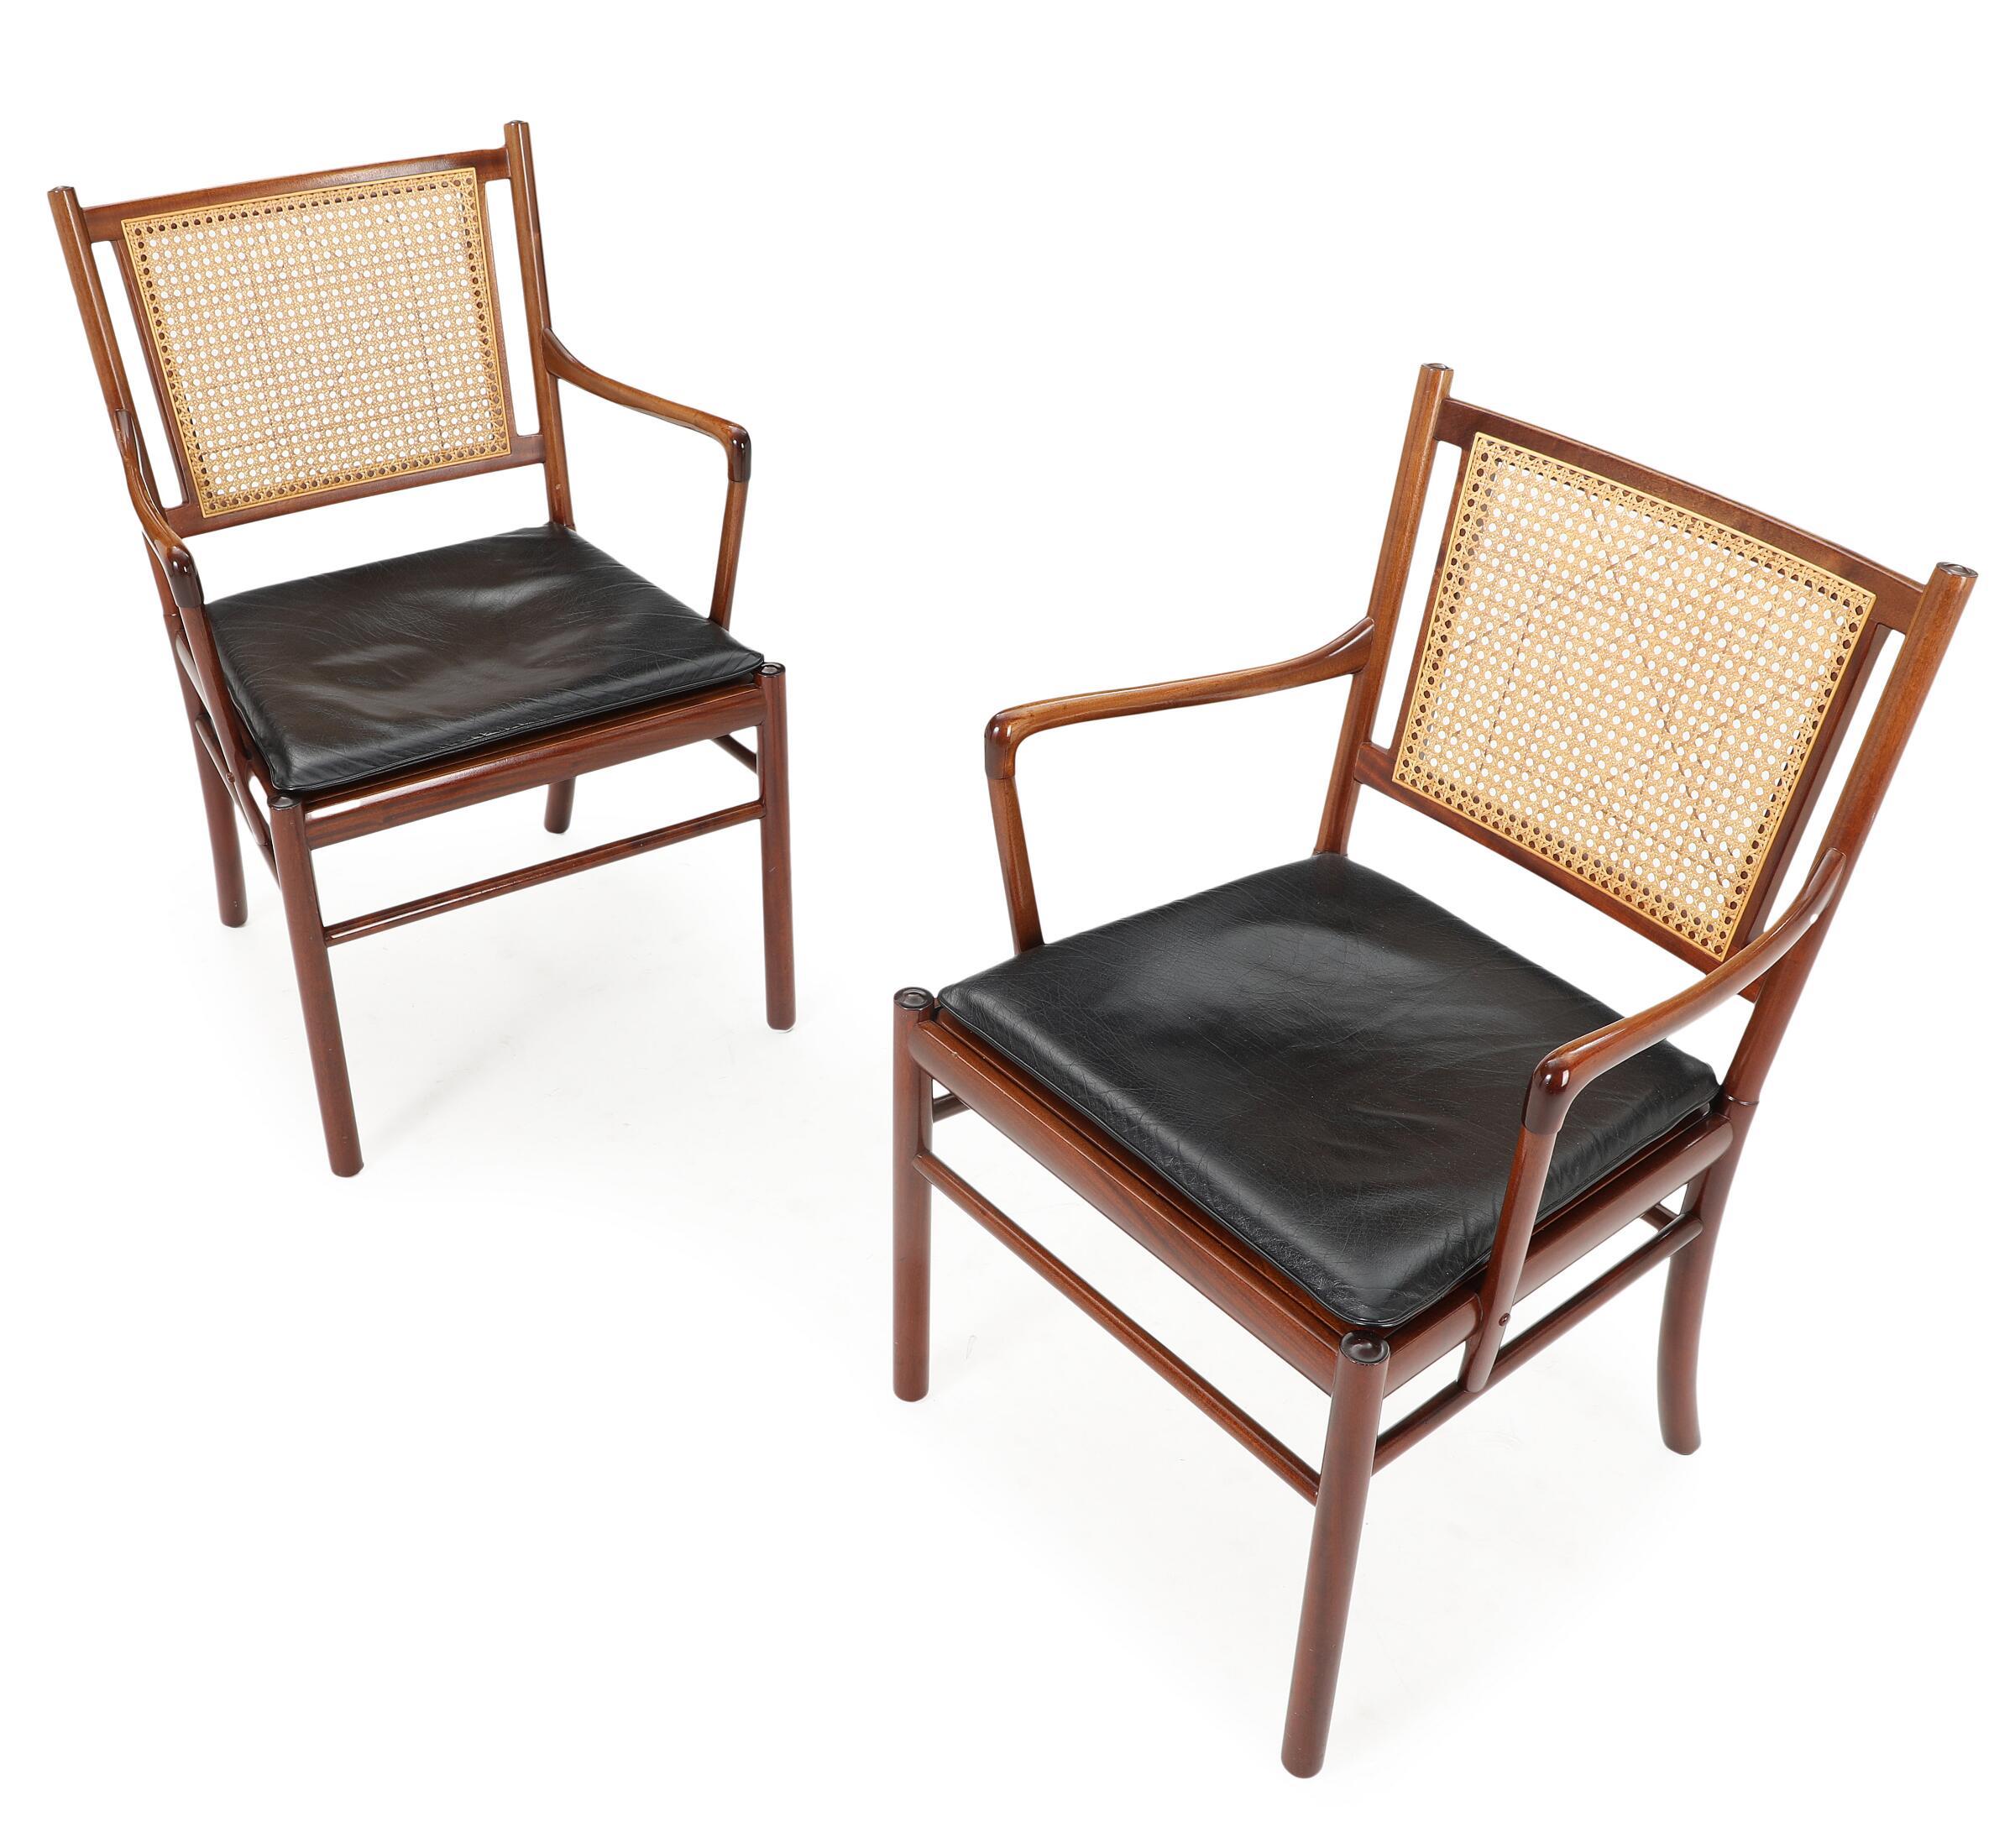 Pair of ‘Colonial’ armchairs, model PJ301 in mahogany, cane and original leather. Elegant pair easy chairs with a mahogany slim frame by the Danish designer Ole Wanscher. These chairs show the great craftsmanship and attention to detail that Ole